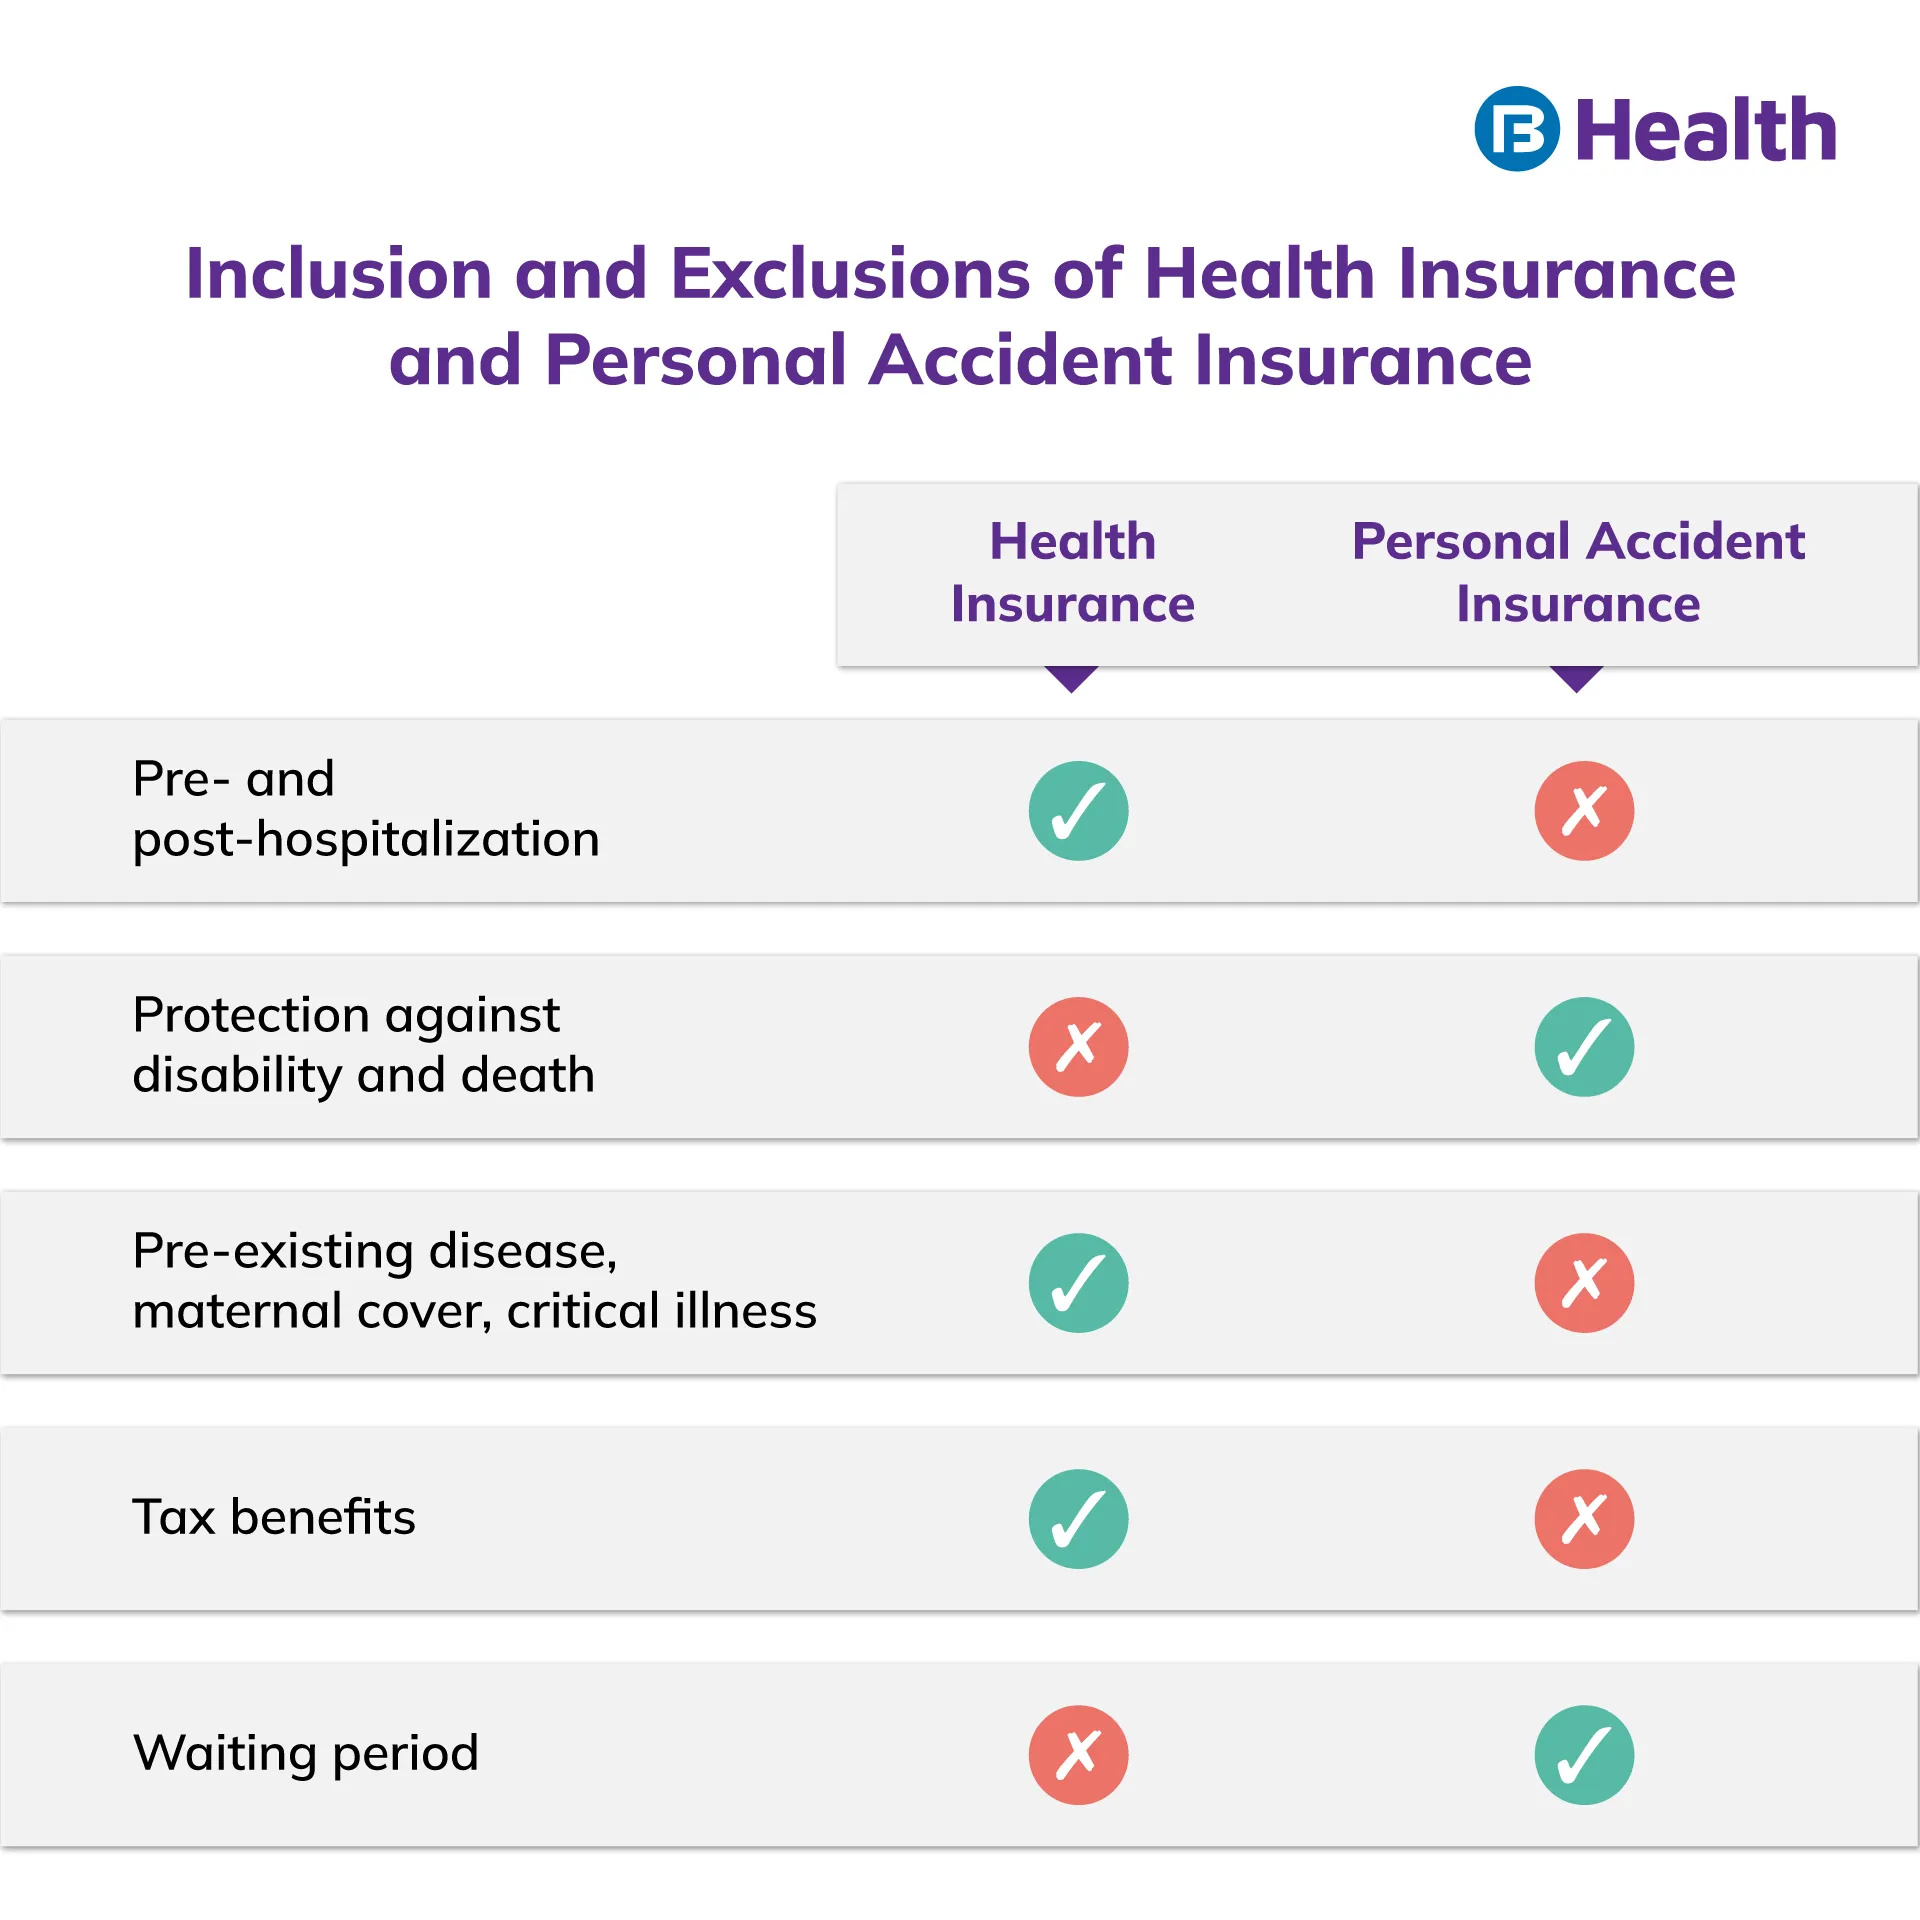 Health and Personal Accident Insurance